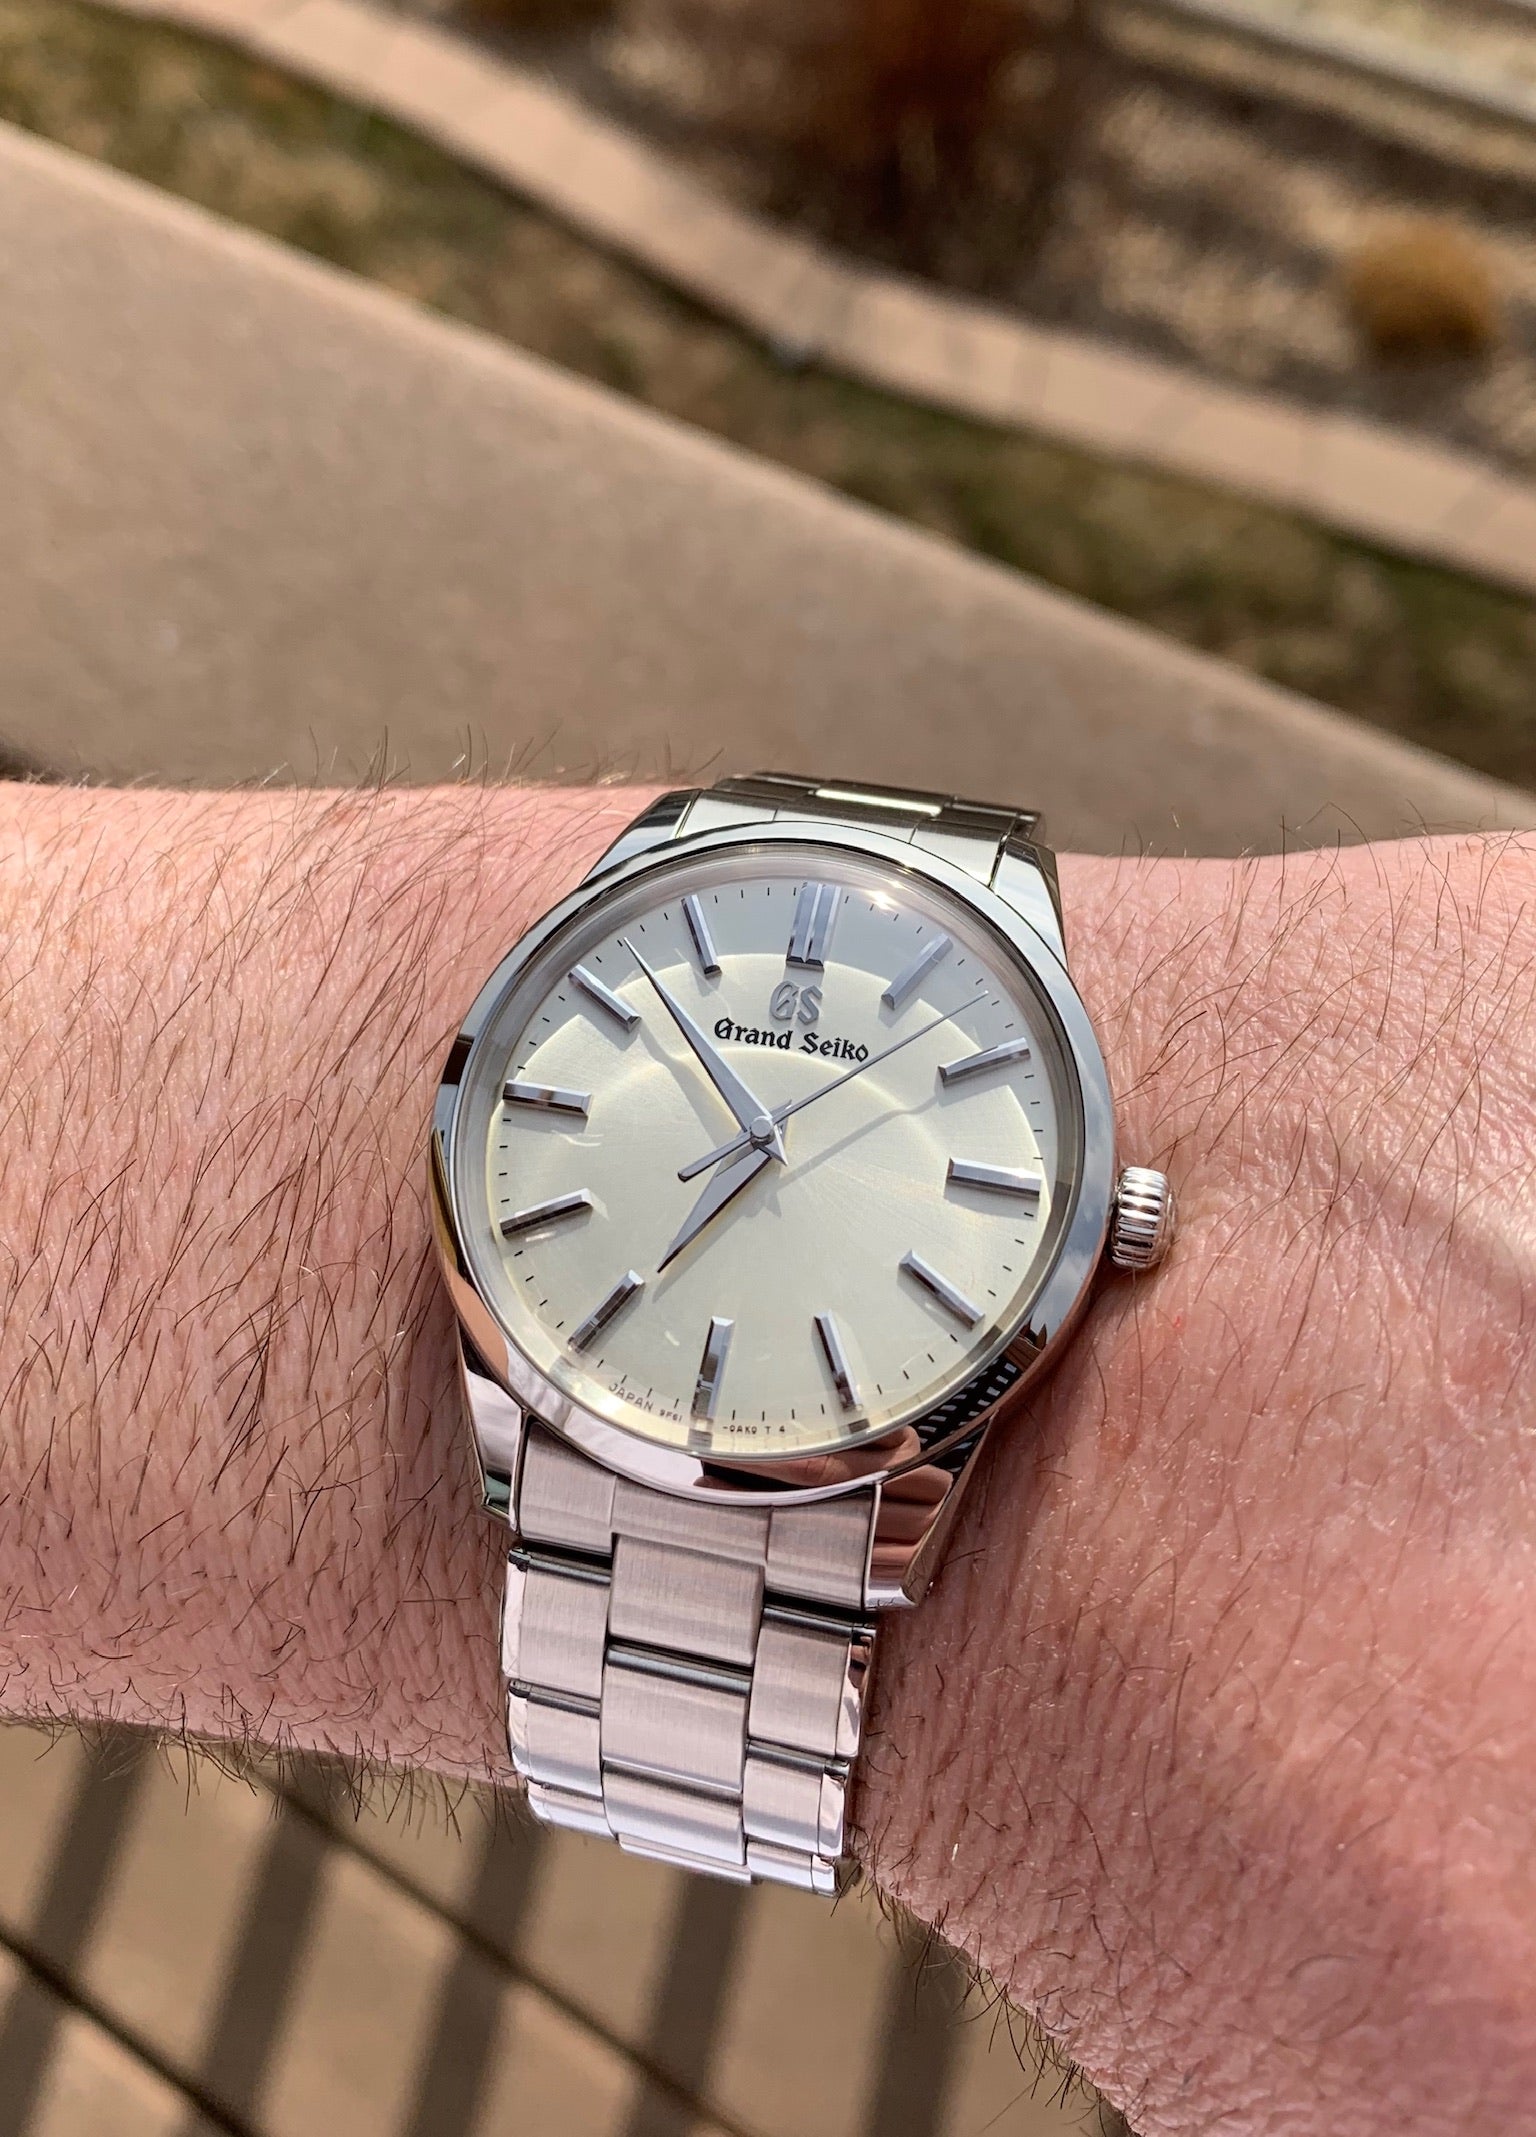 Review of the Grand Seiko SBGX319 | WatchUSeek Watch Forums